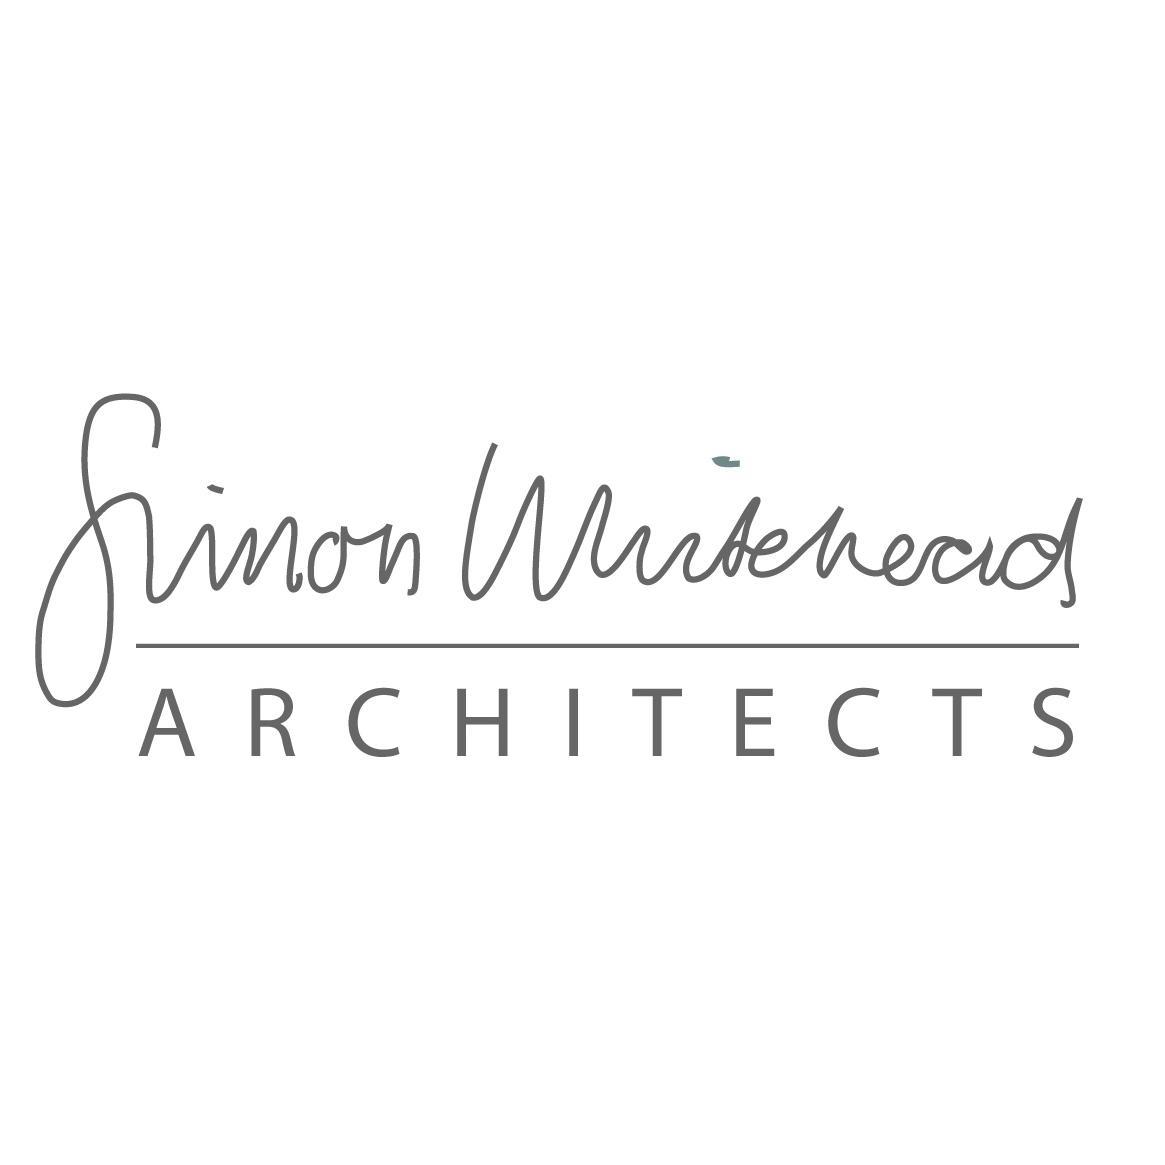 Architectural practice based in London and Tunbridge Wells, working in residential, commercial, leisure and retail sectors.